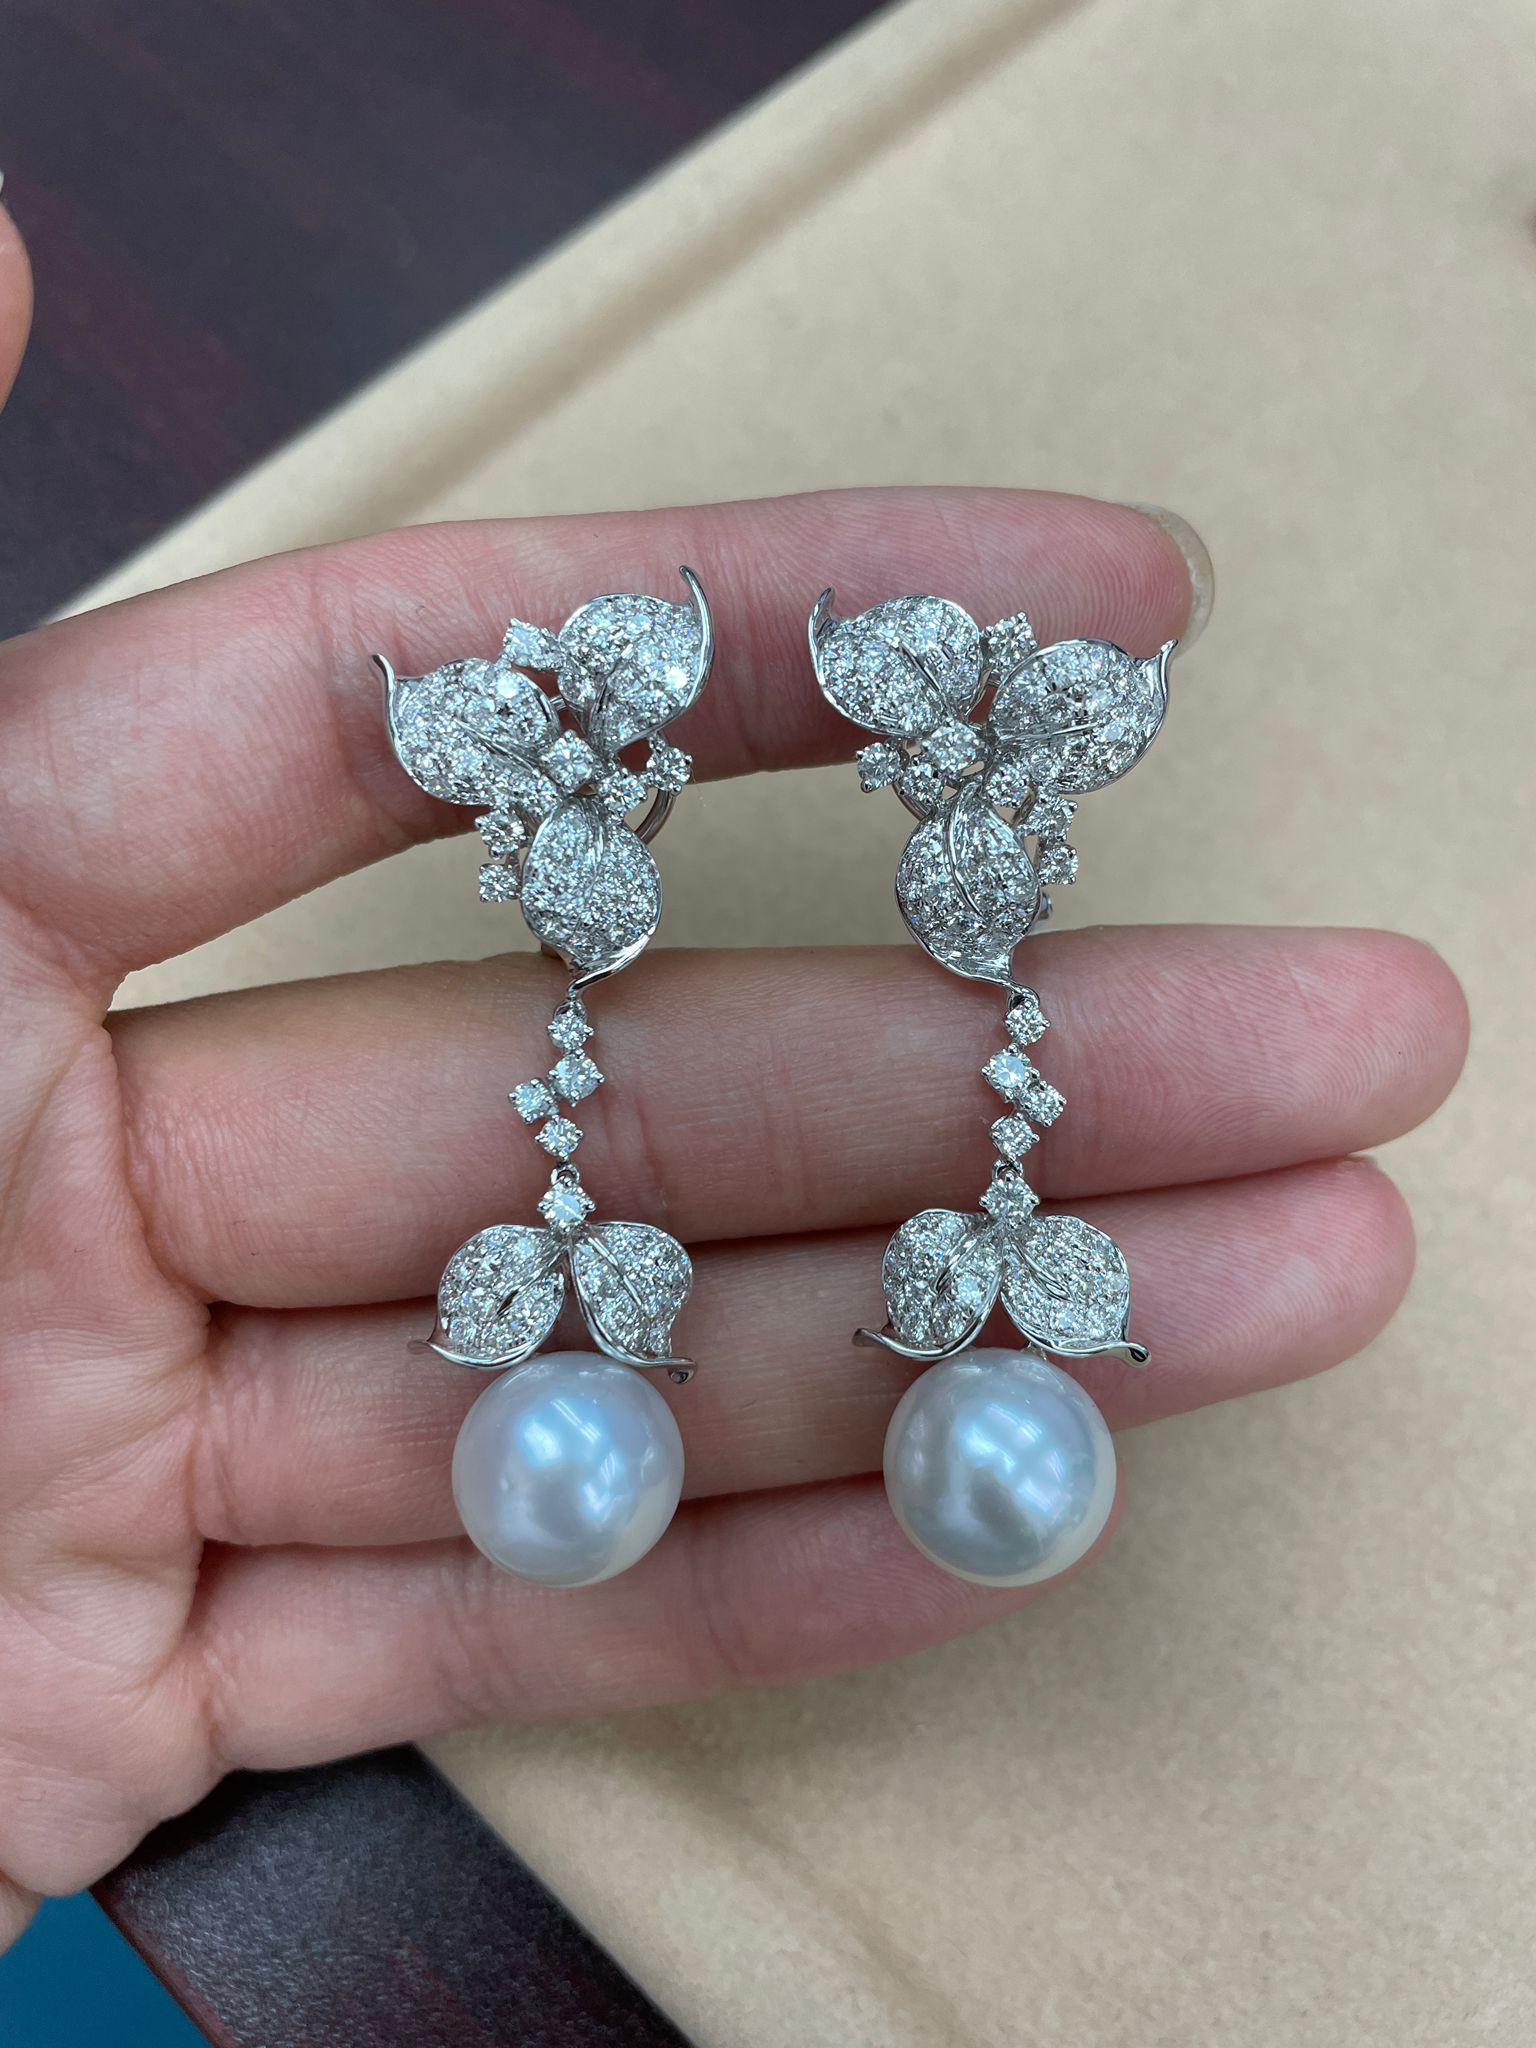 The Following Item we are offering are these Extremely Rare Beautiful 18KT Gold Fine Large Fancy South Sea White Pearl and Diamond Earrings. Each Earring features Gorgeous Glittering Diamonds in the forma of Flowers adorned by a Magnificent Fine